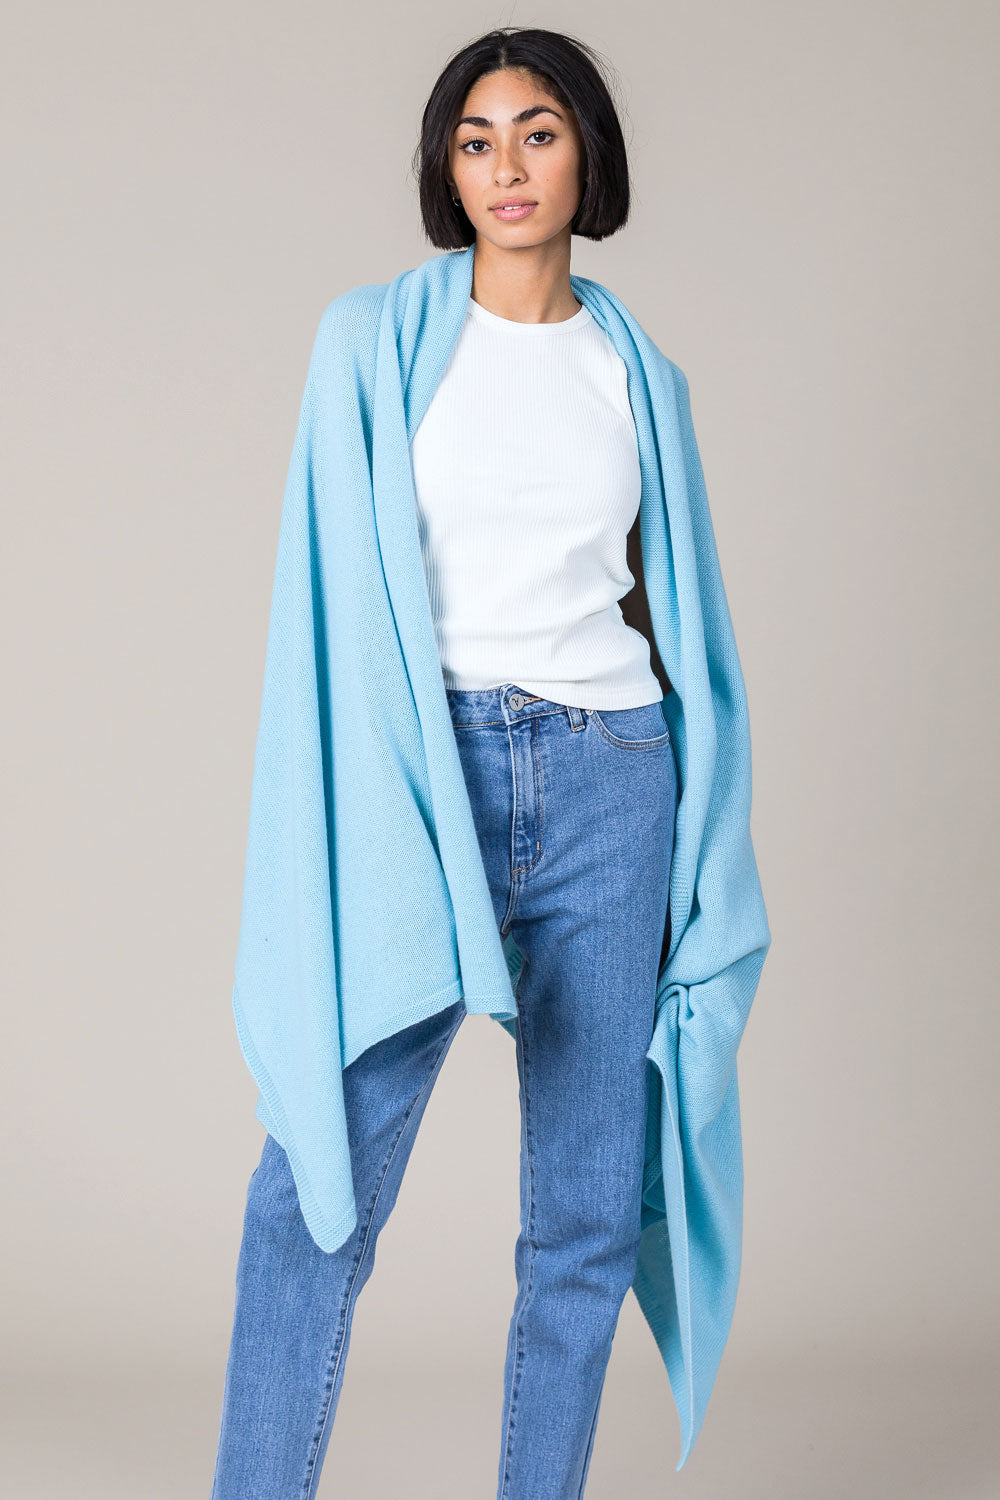 Cashmere Travel Wrap in Paradise Blue